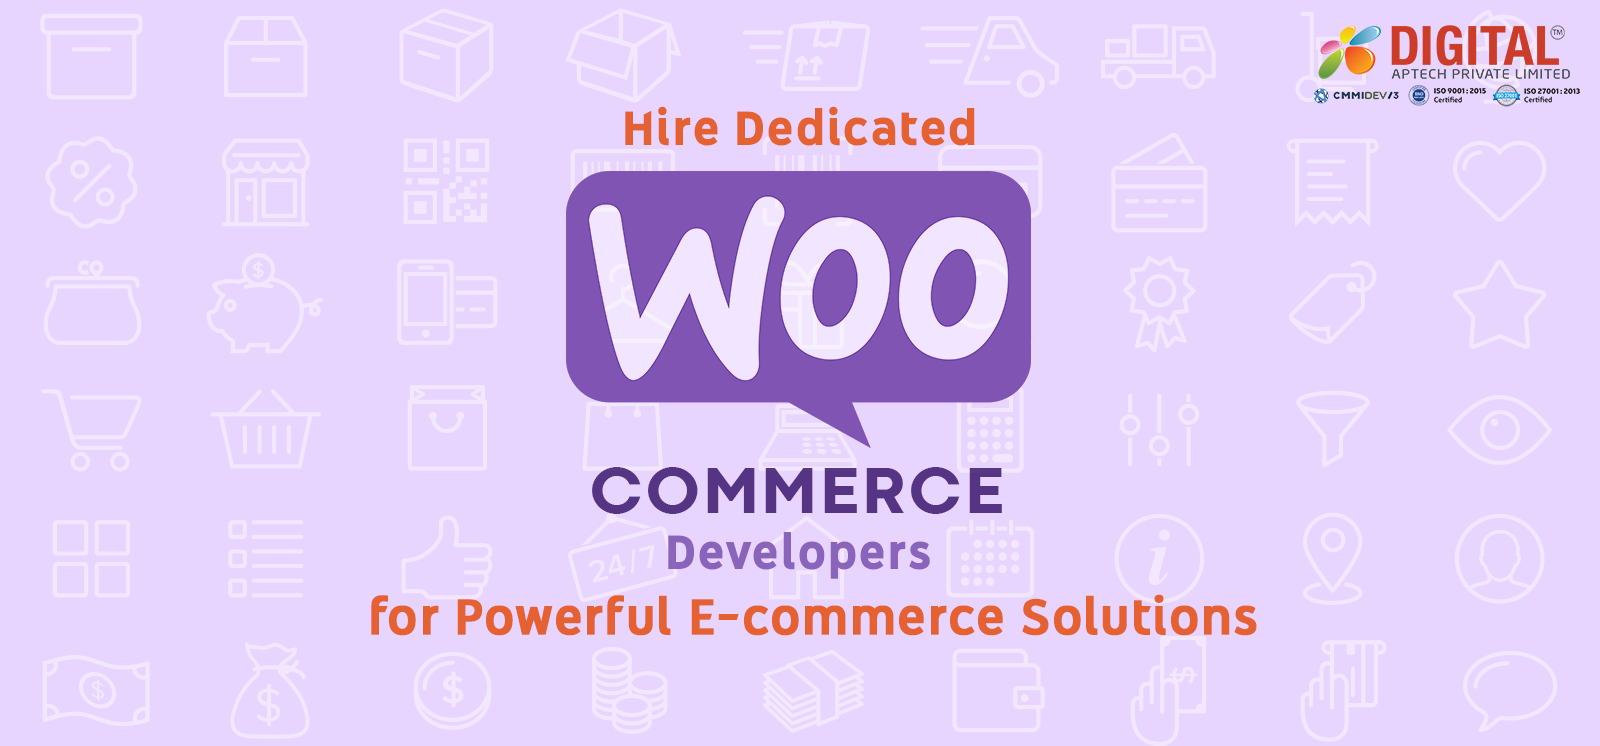 Hire Dedicated WooCommerce Developers for Powerful E-Commerce Solutions